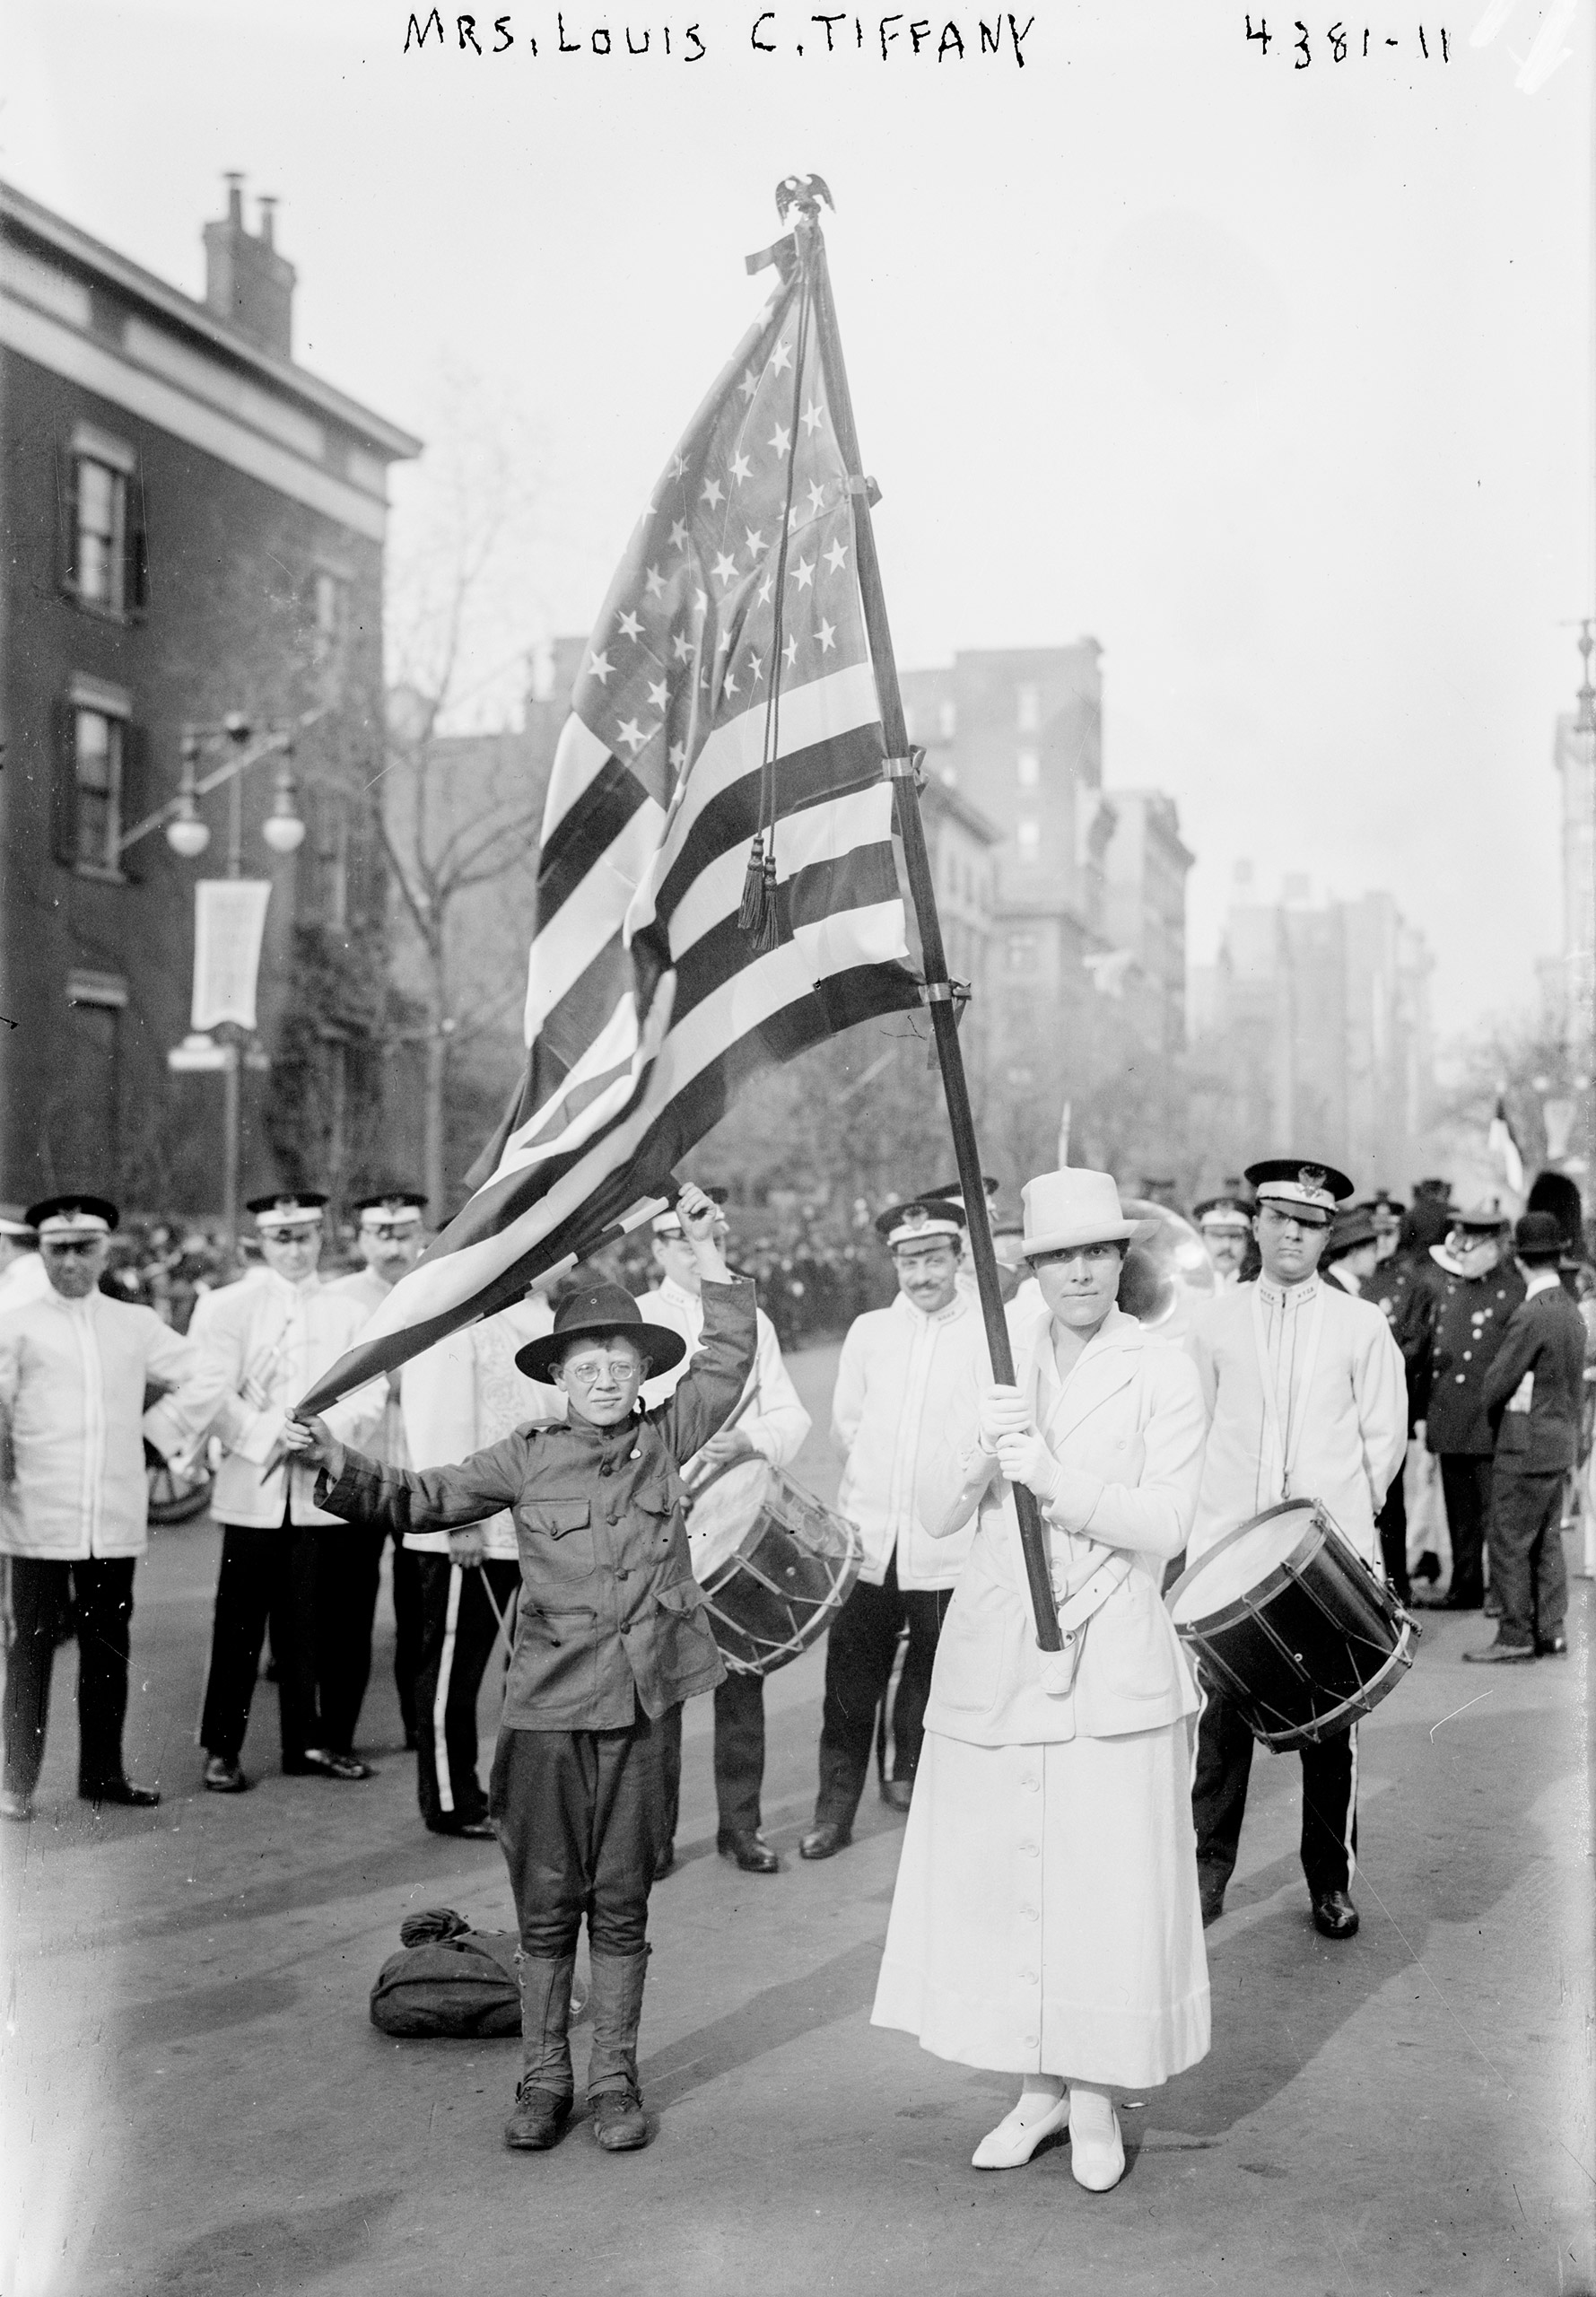 Mrs. Charles Lewis Tiffany, née Katrina Brandes Ely, carrying a flag in suffrage parade, New York City, Oct. 27, 1917.